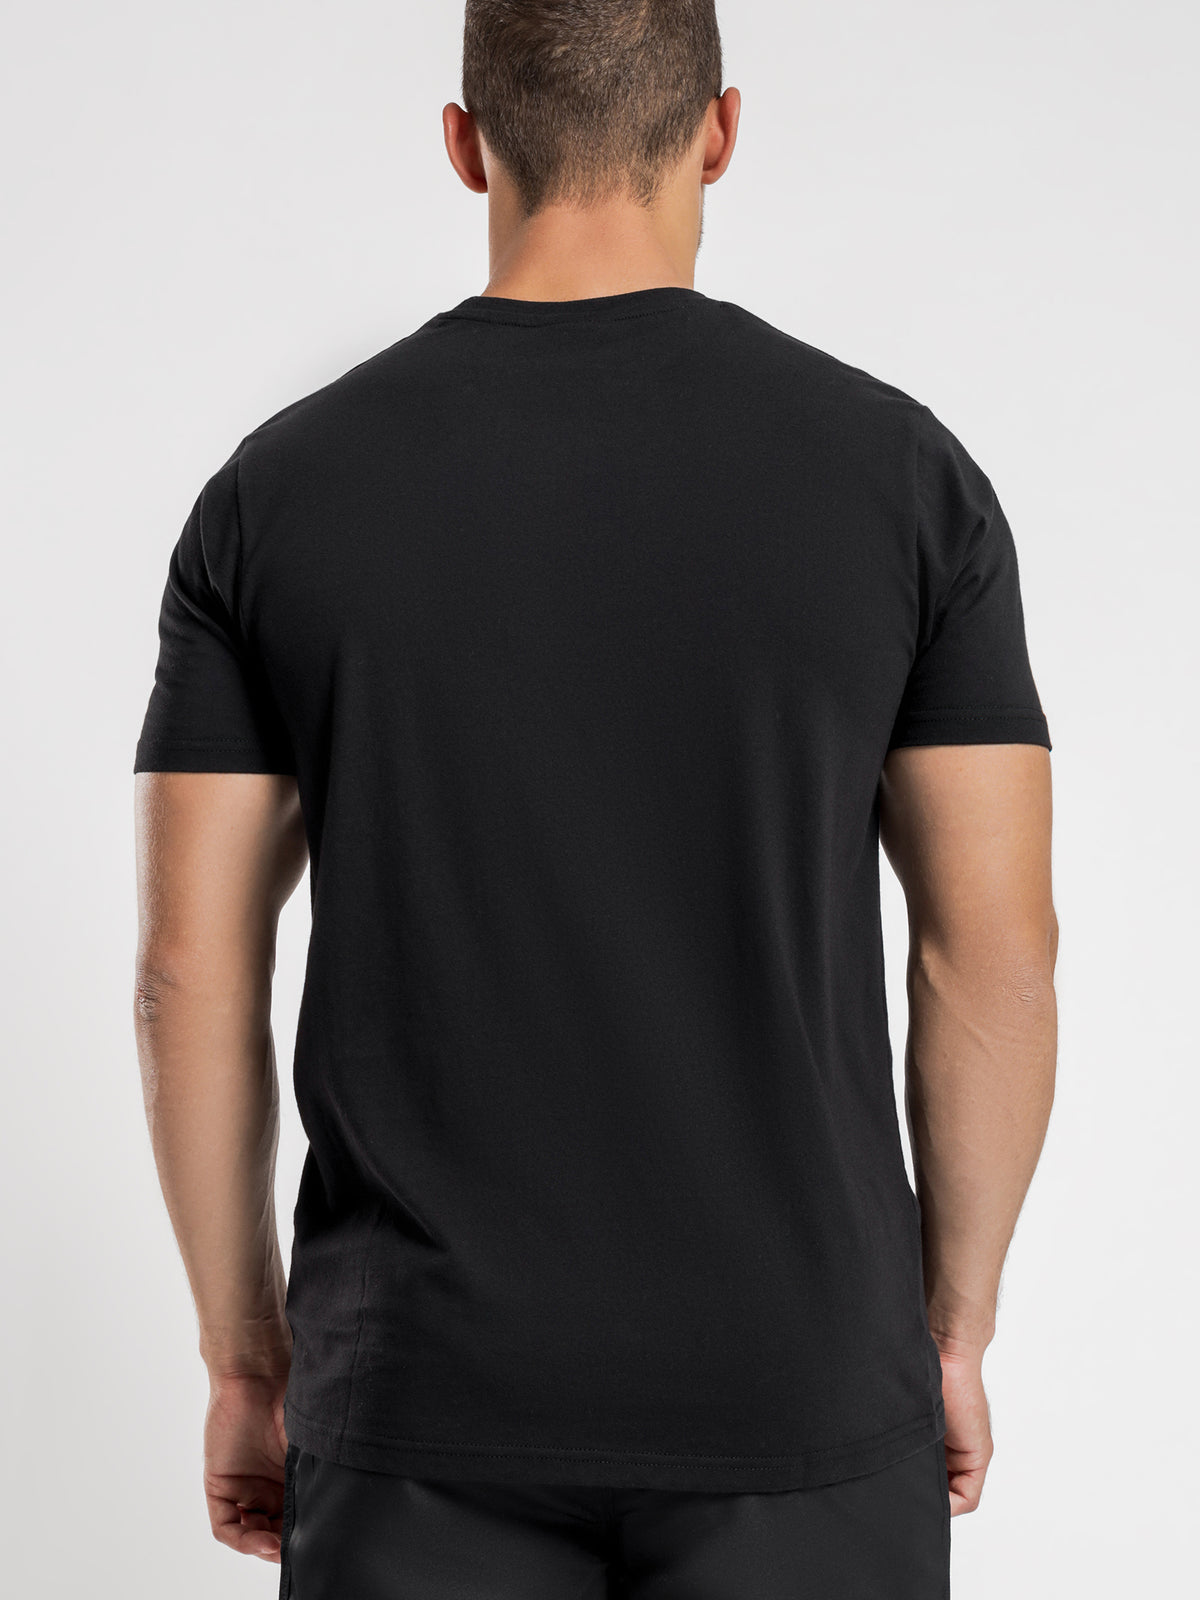 Canaletto T-Shirt in Anthracite Black